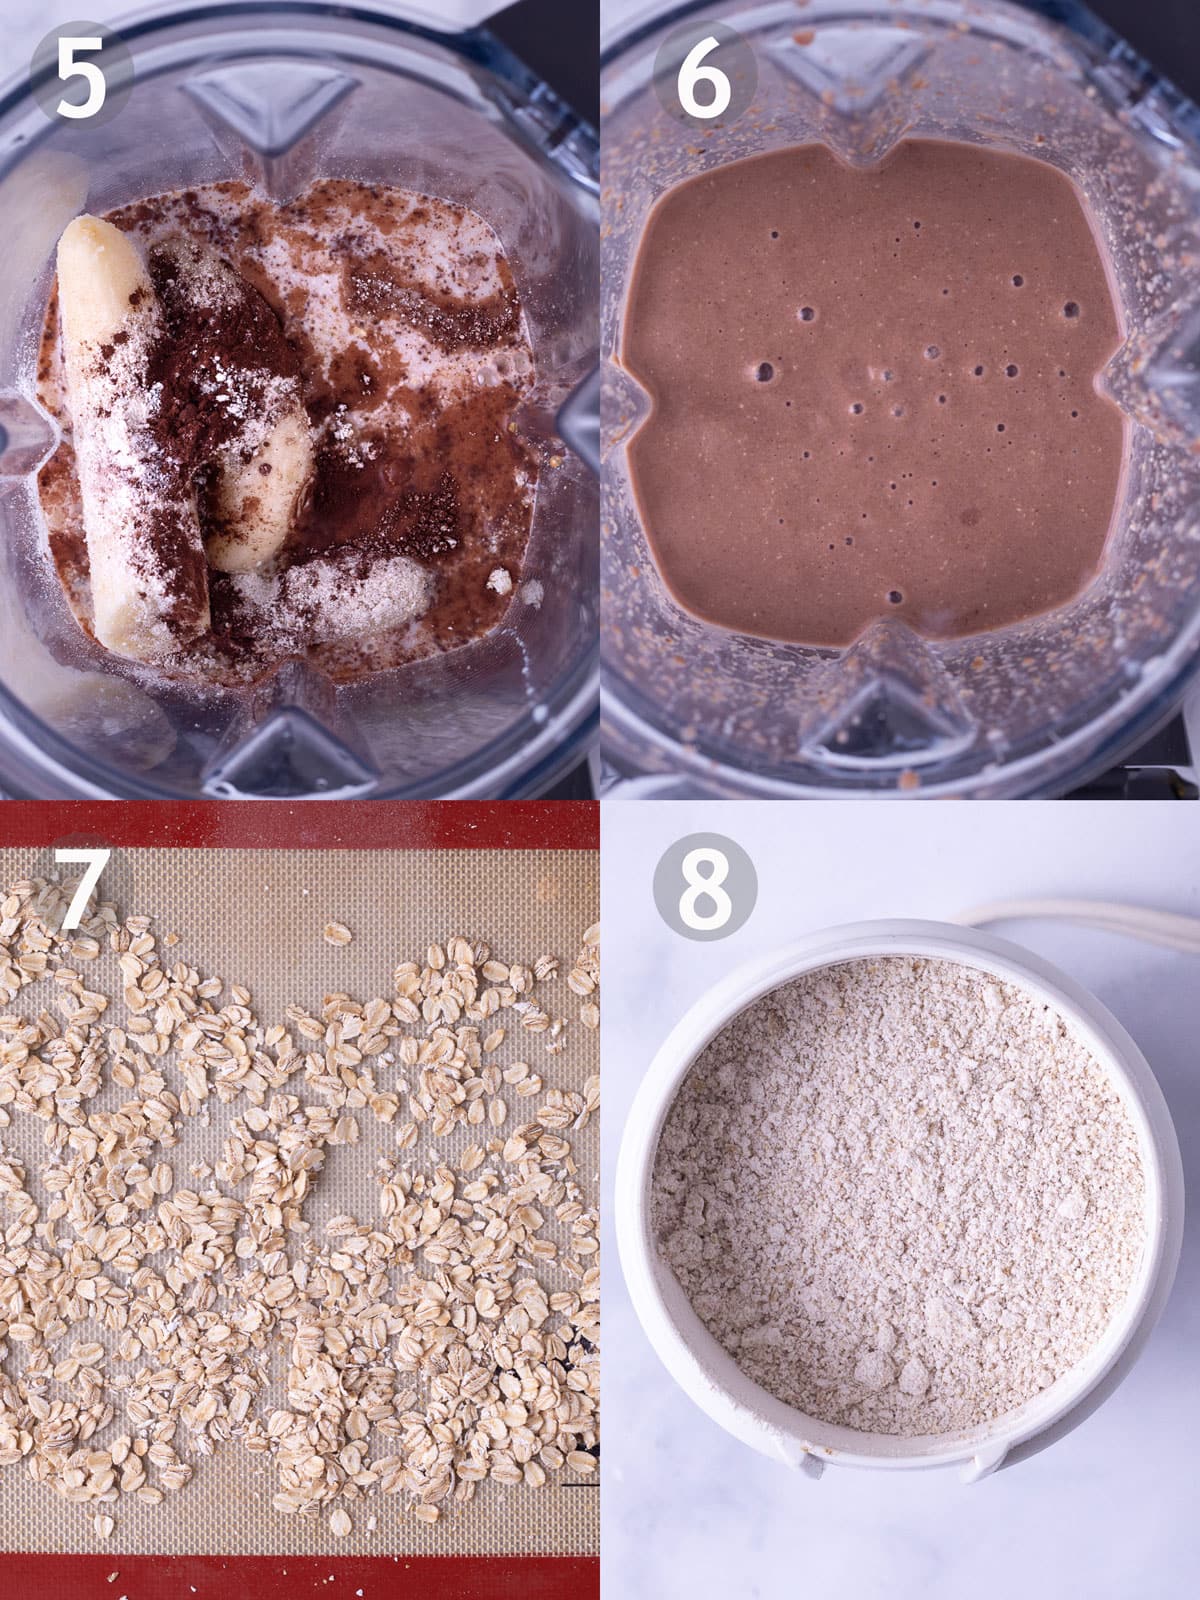 Before and after photos of blending ingredients for chocolate peanut butter banana oat smoothie and toasting and grinding the oats.